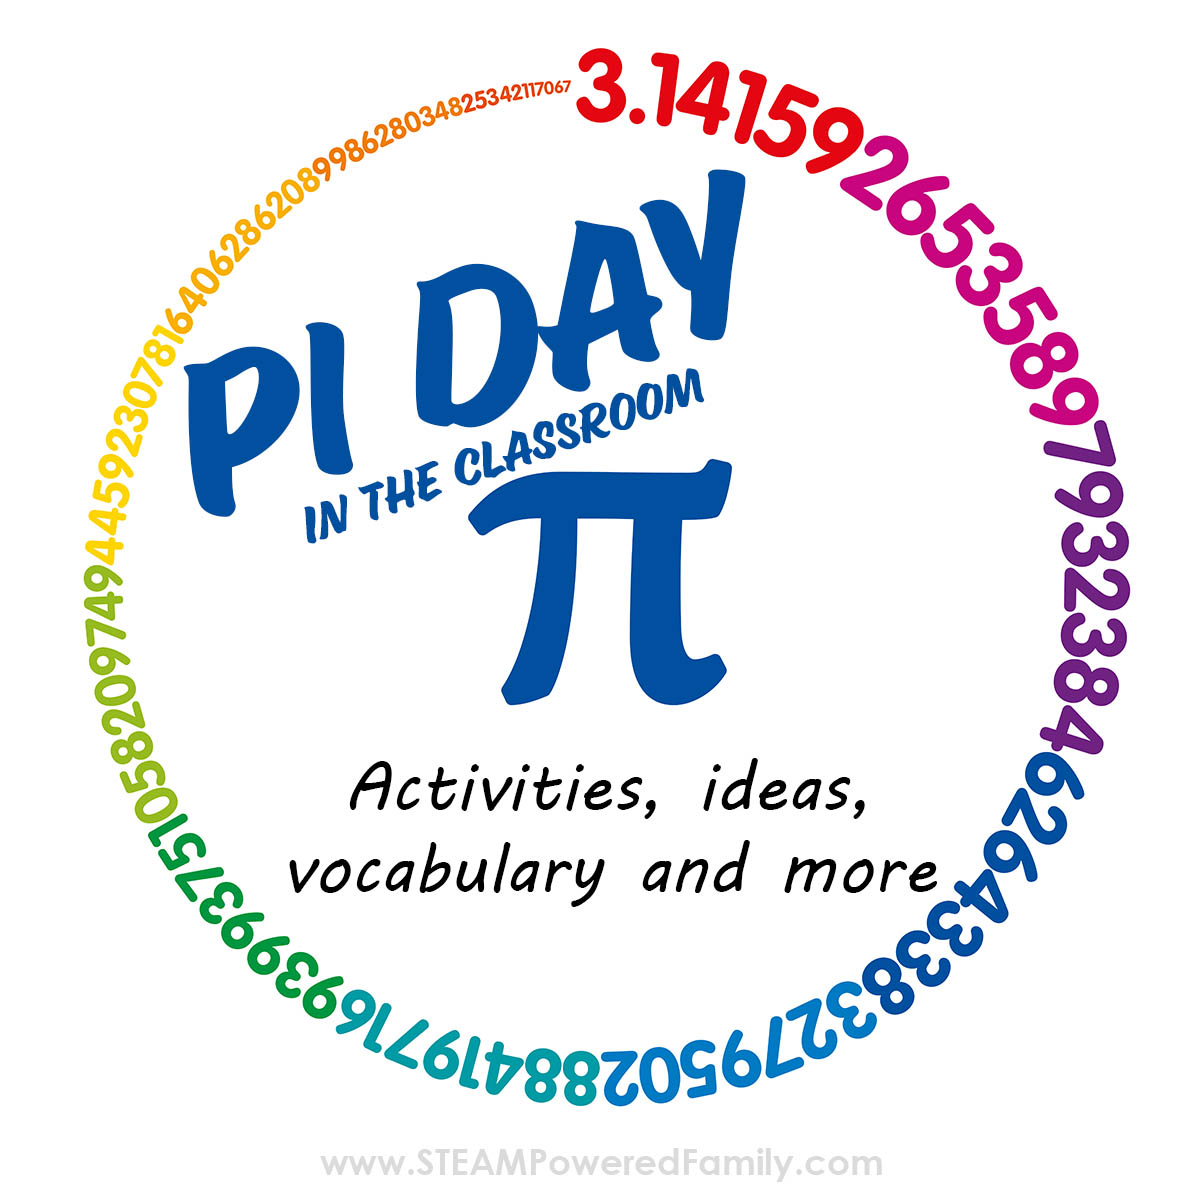 What is Pi Day?